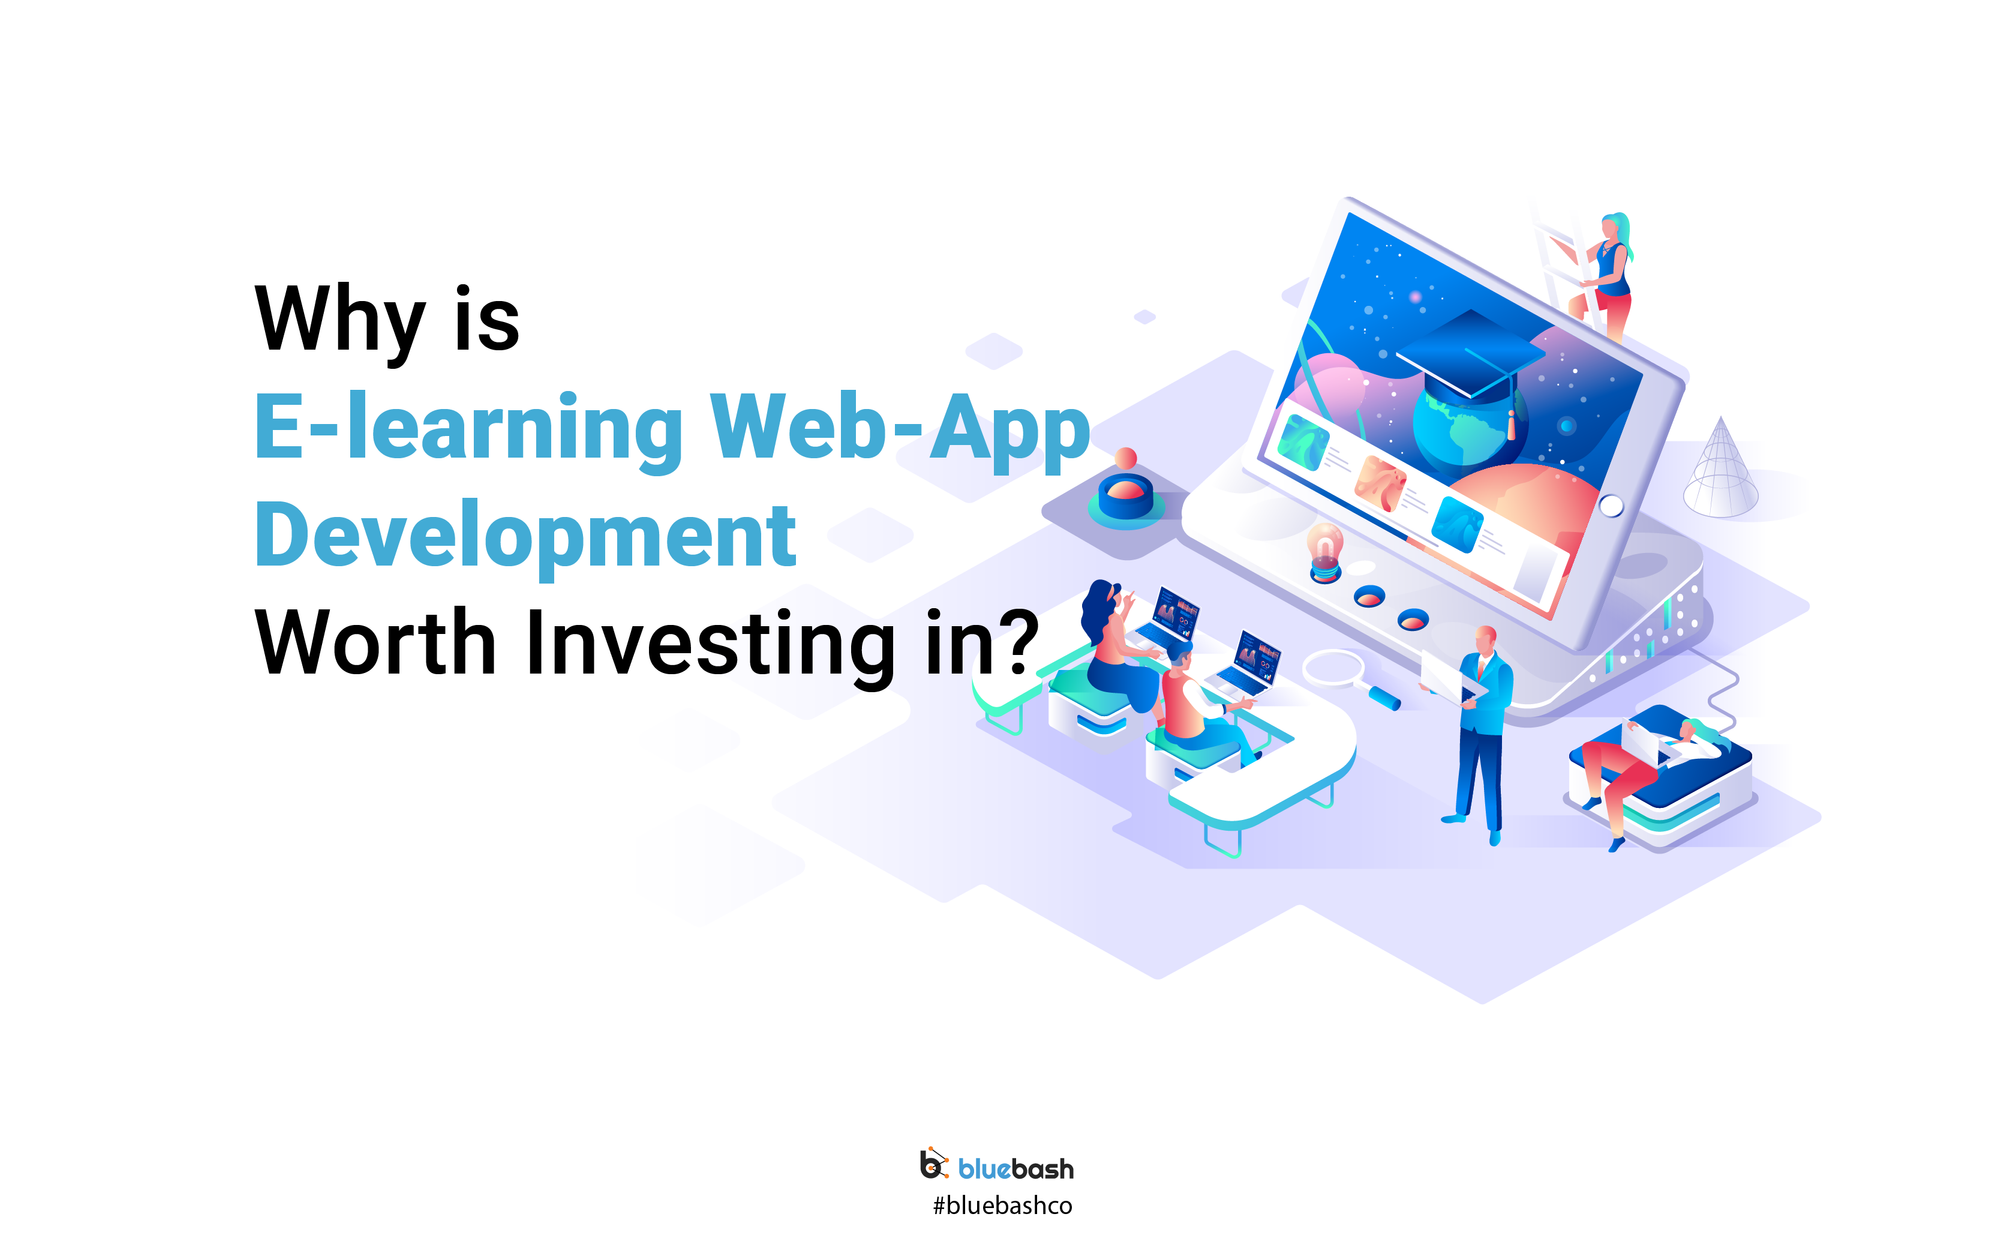 Why is E-learning Web-App Development Worth Investing in?